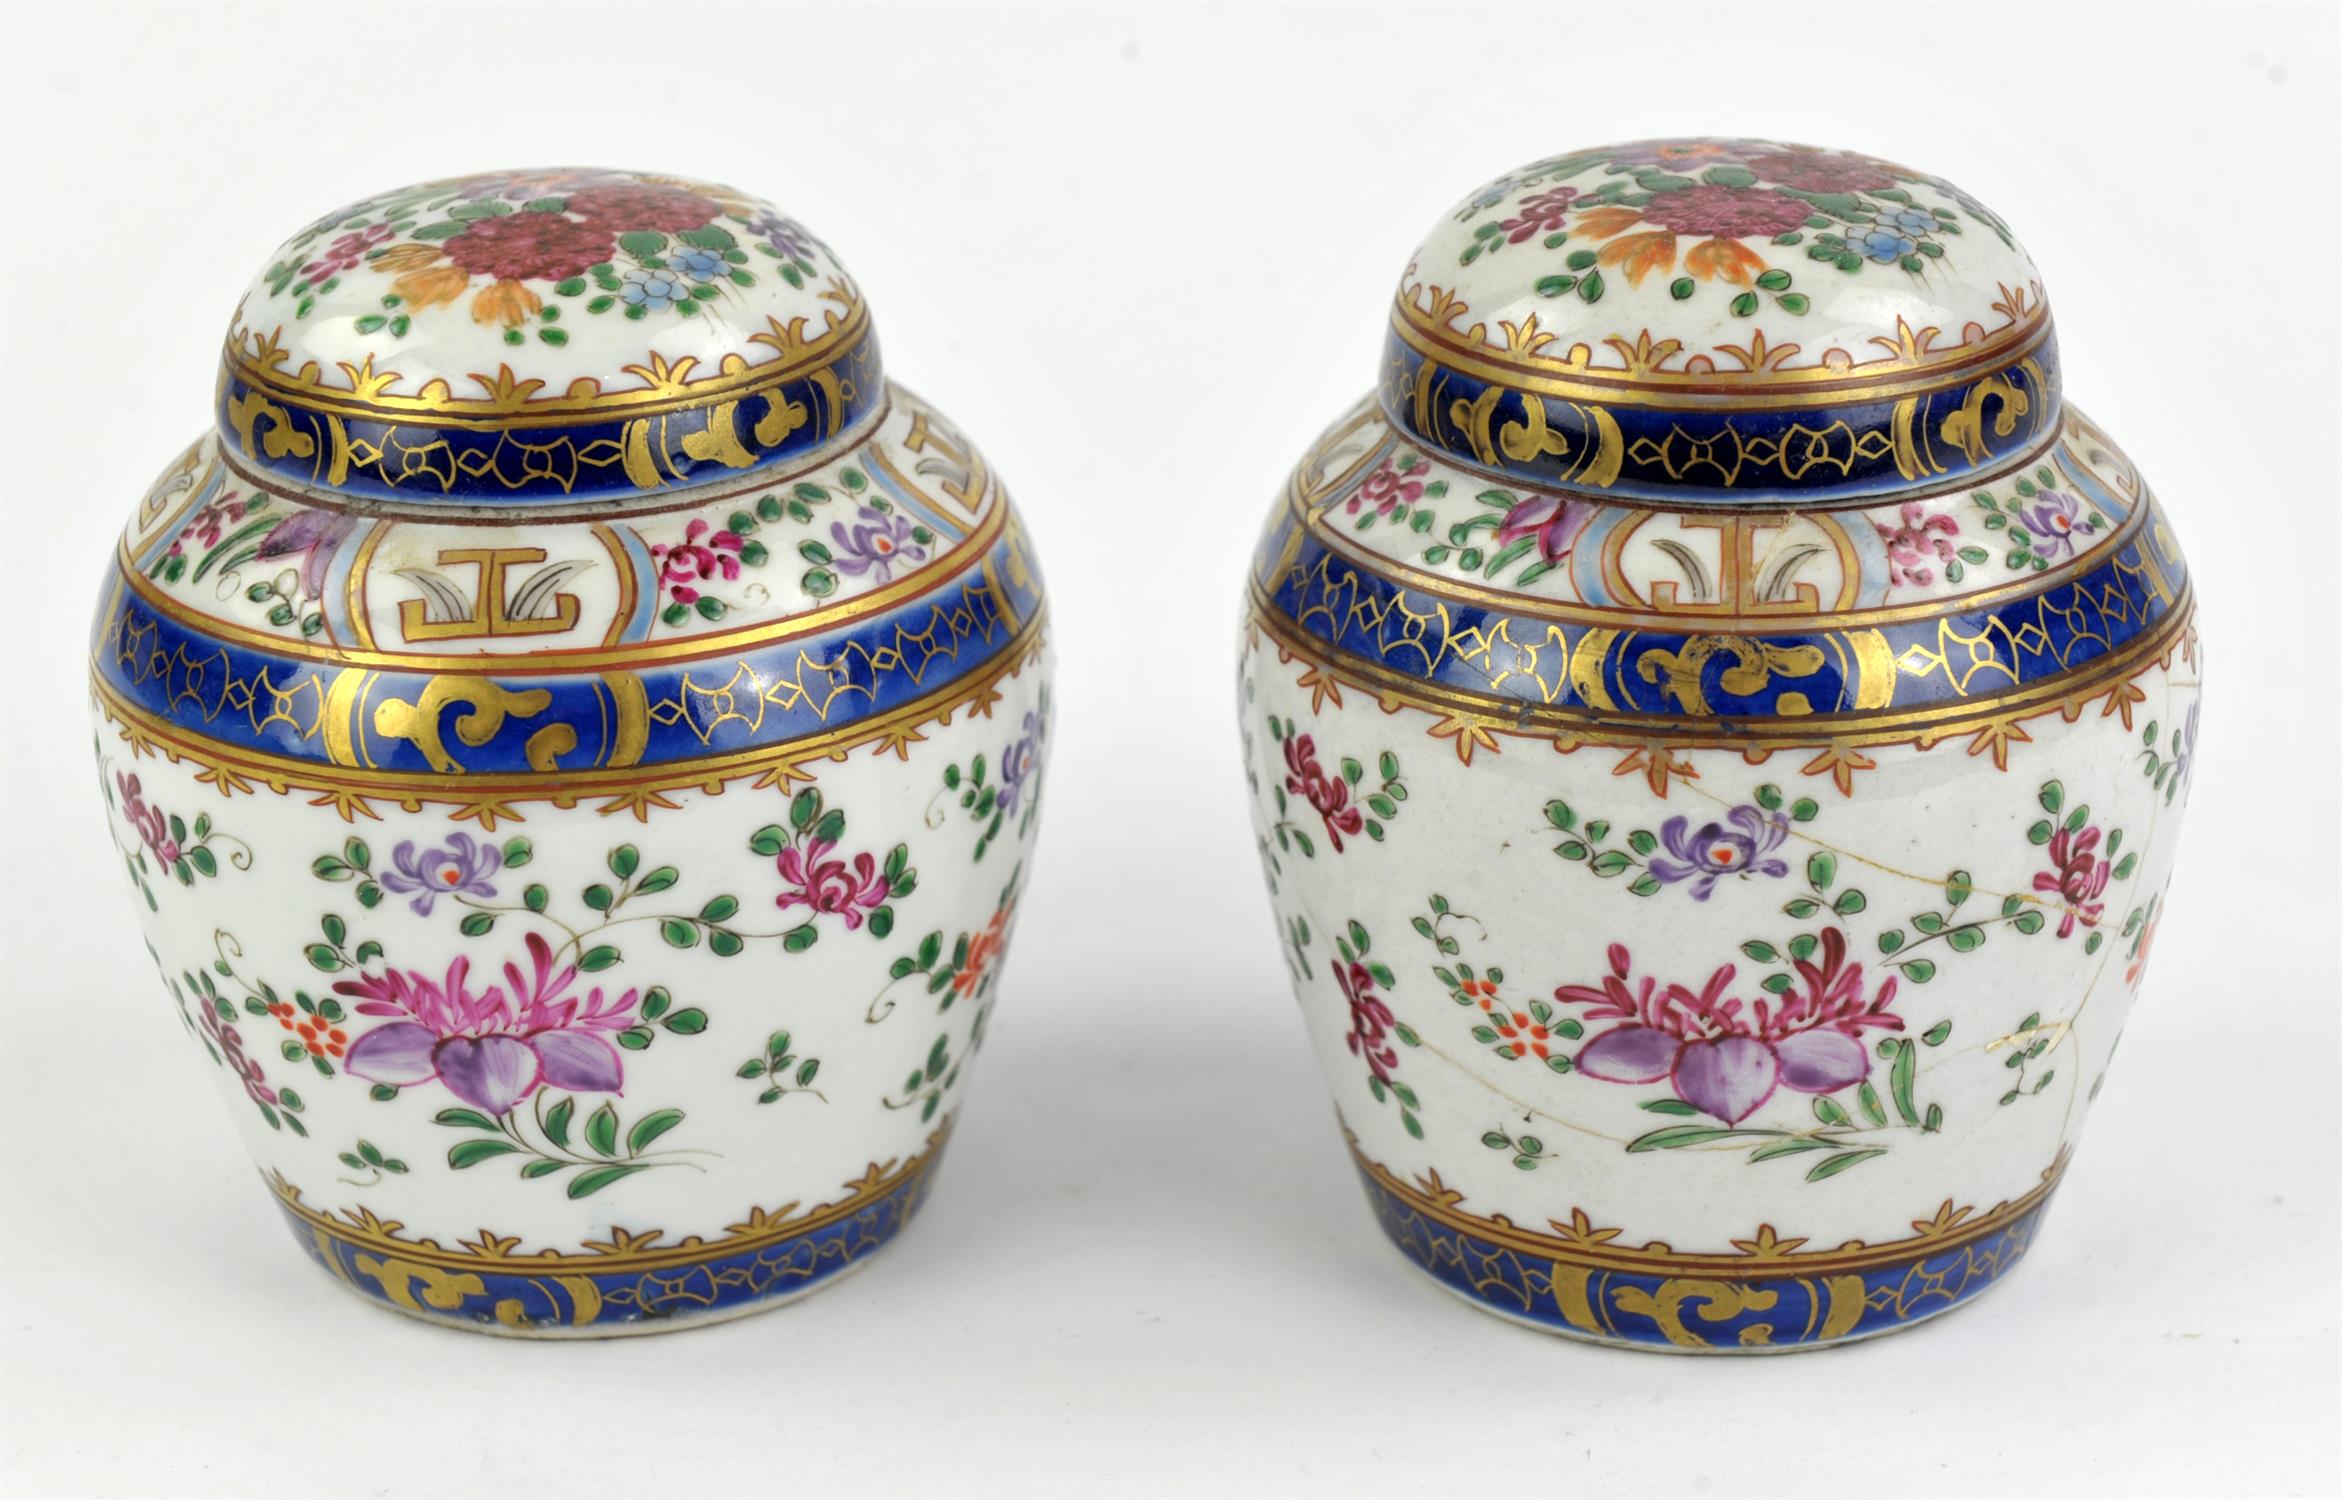 Eight famille rose dishes; each one decorated with floral designs and about 22.5 cm diameter, - Image 5 of 28